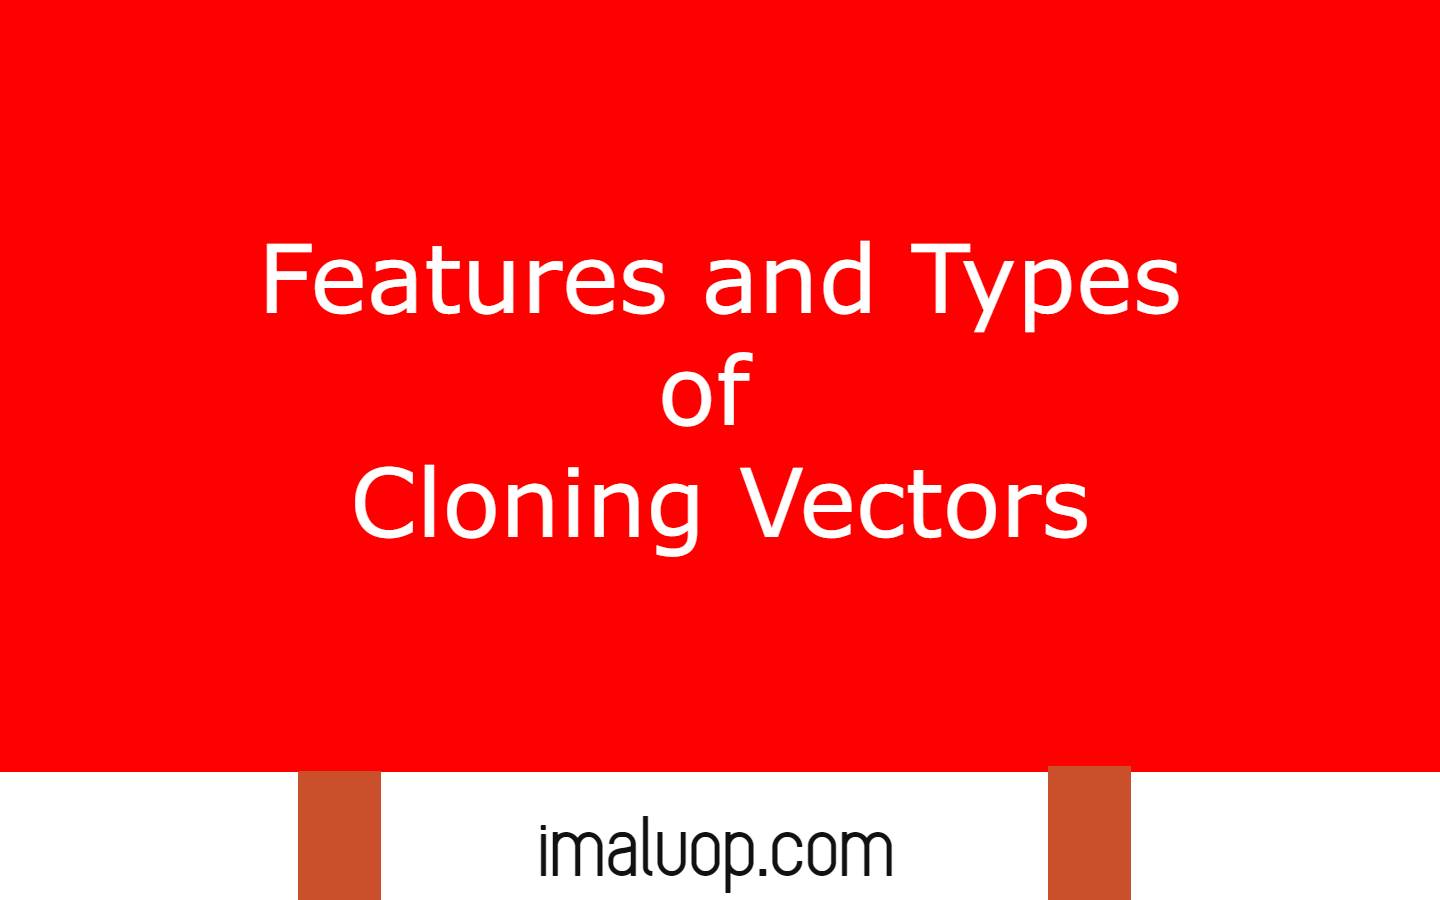 Features and Types of Cloning Vectors